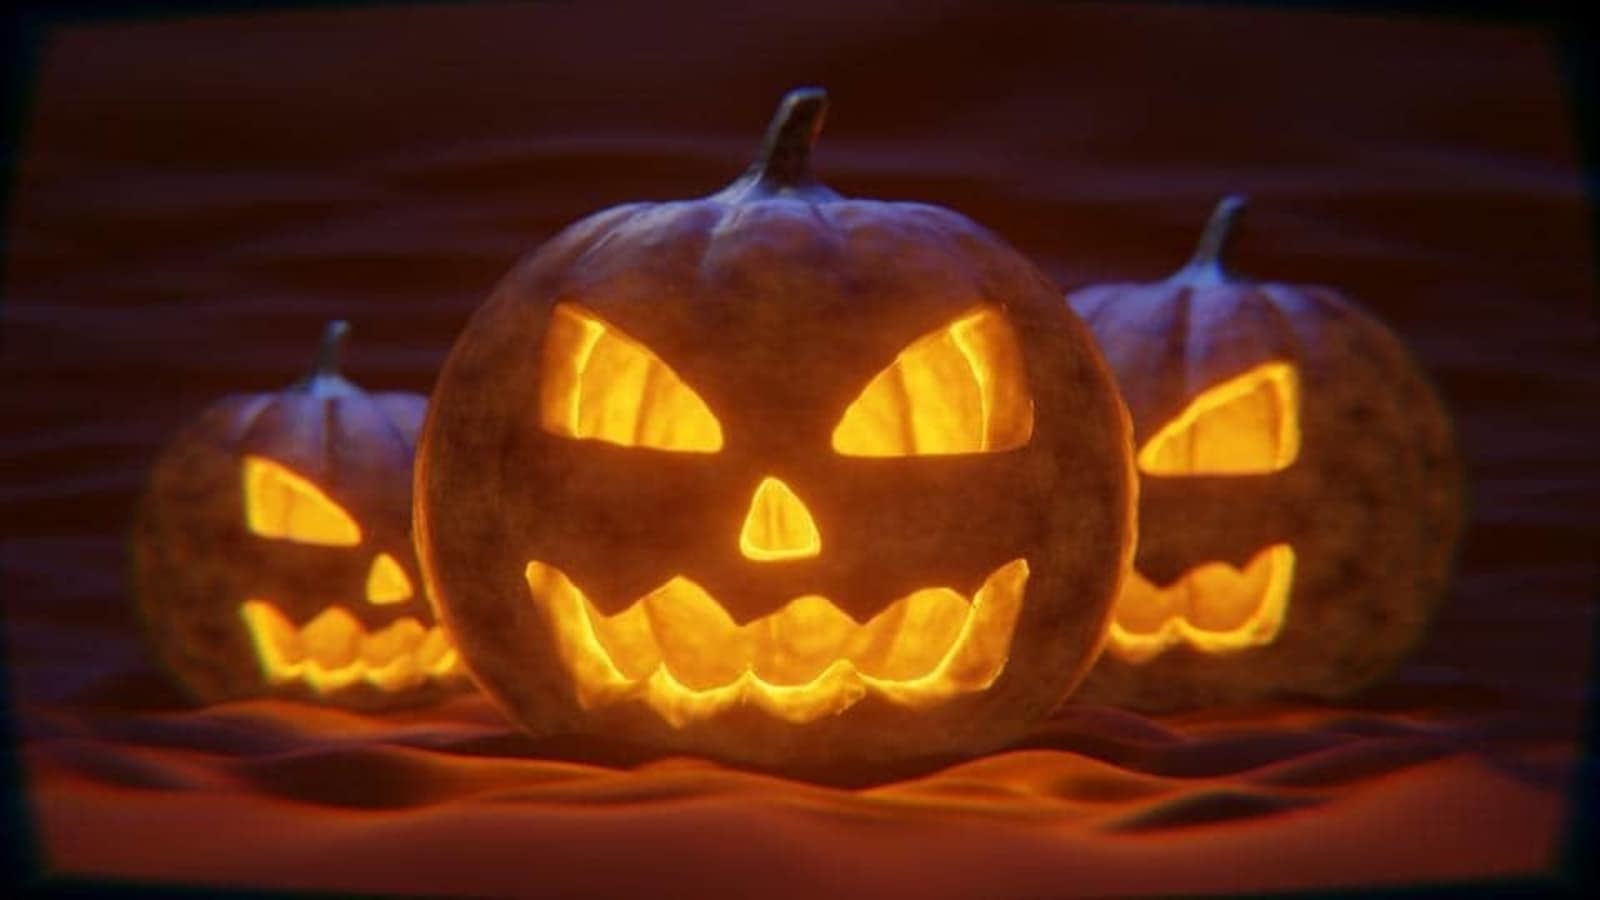 Top 5 Halloween Traditions and Their Meaning